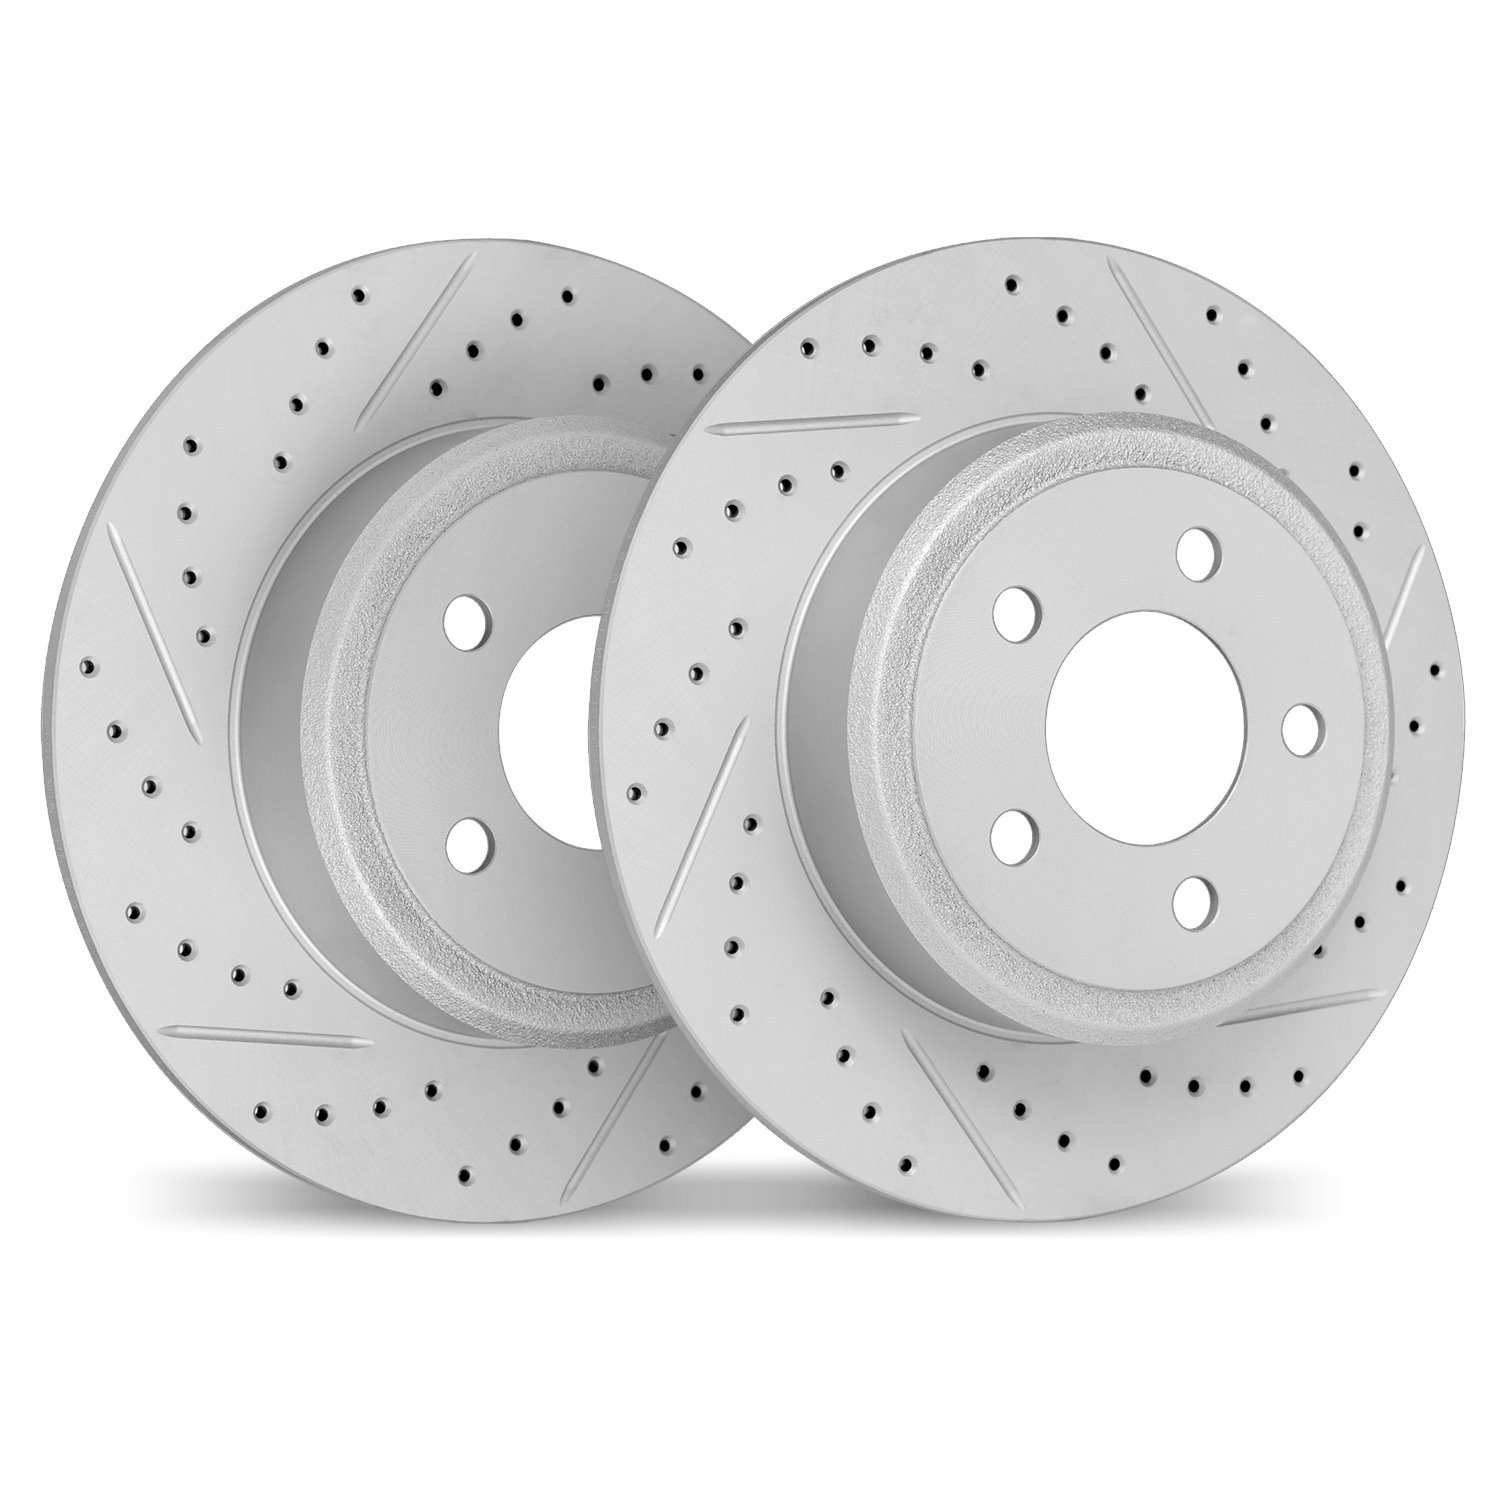 2002-63083 Geoperformance Drilled/Slotted Brake Rotors, Fits Select Mercedes-Benz, Position: Rear